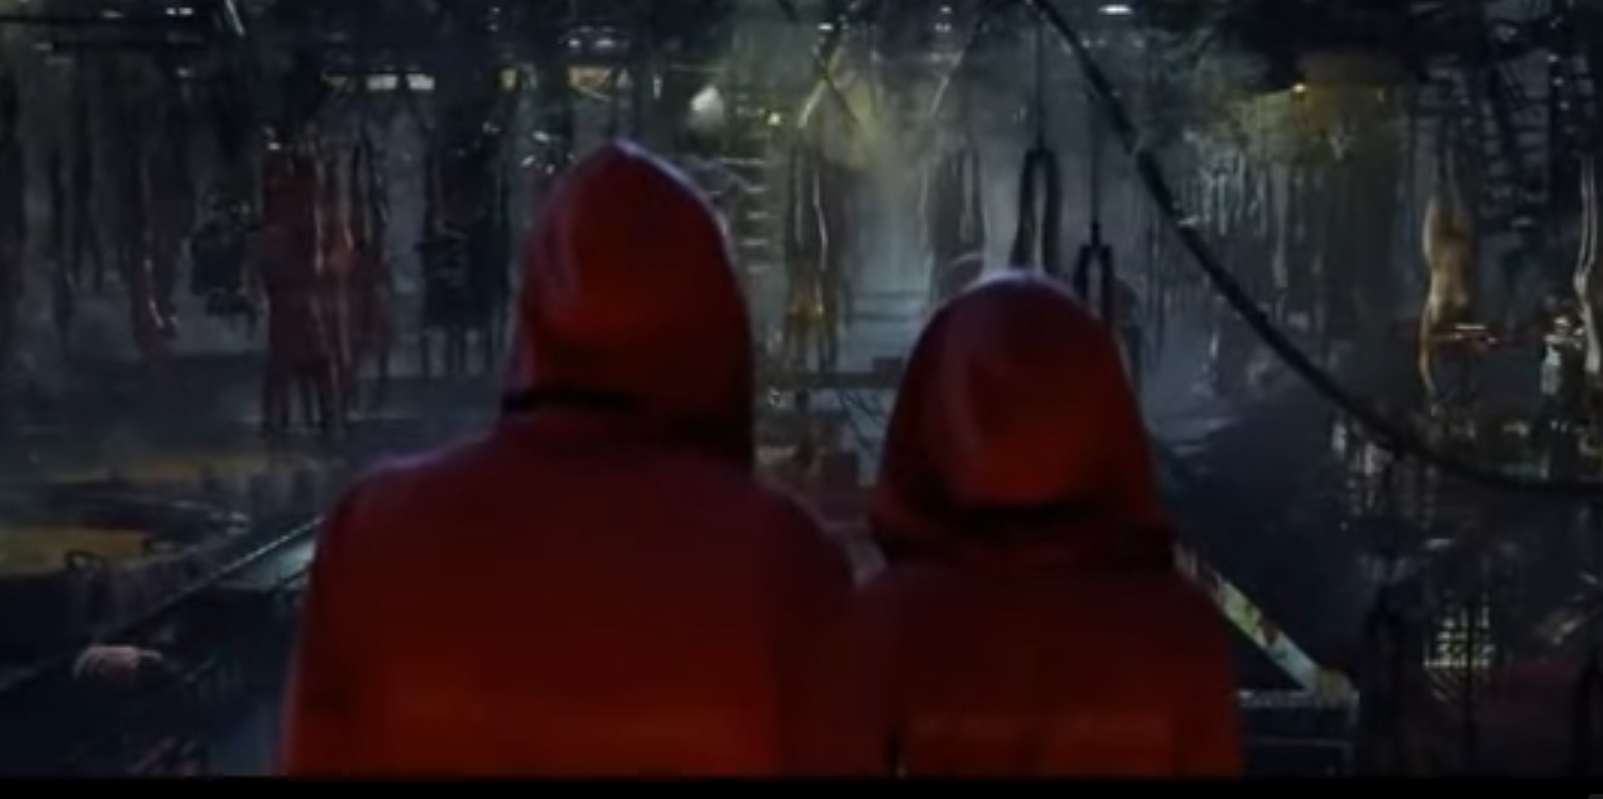 Somni is shown a slaughterhouse, with the bodies of clones hanging upside-down